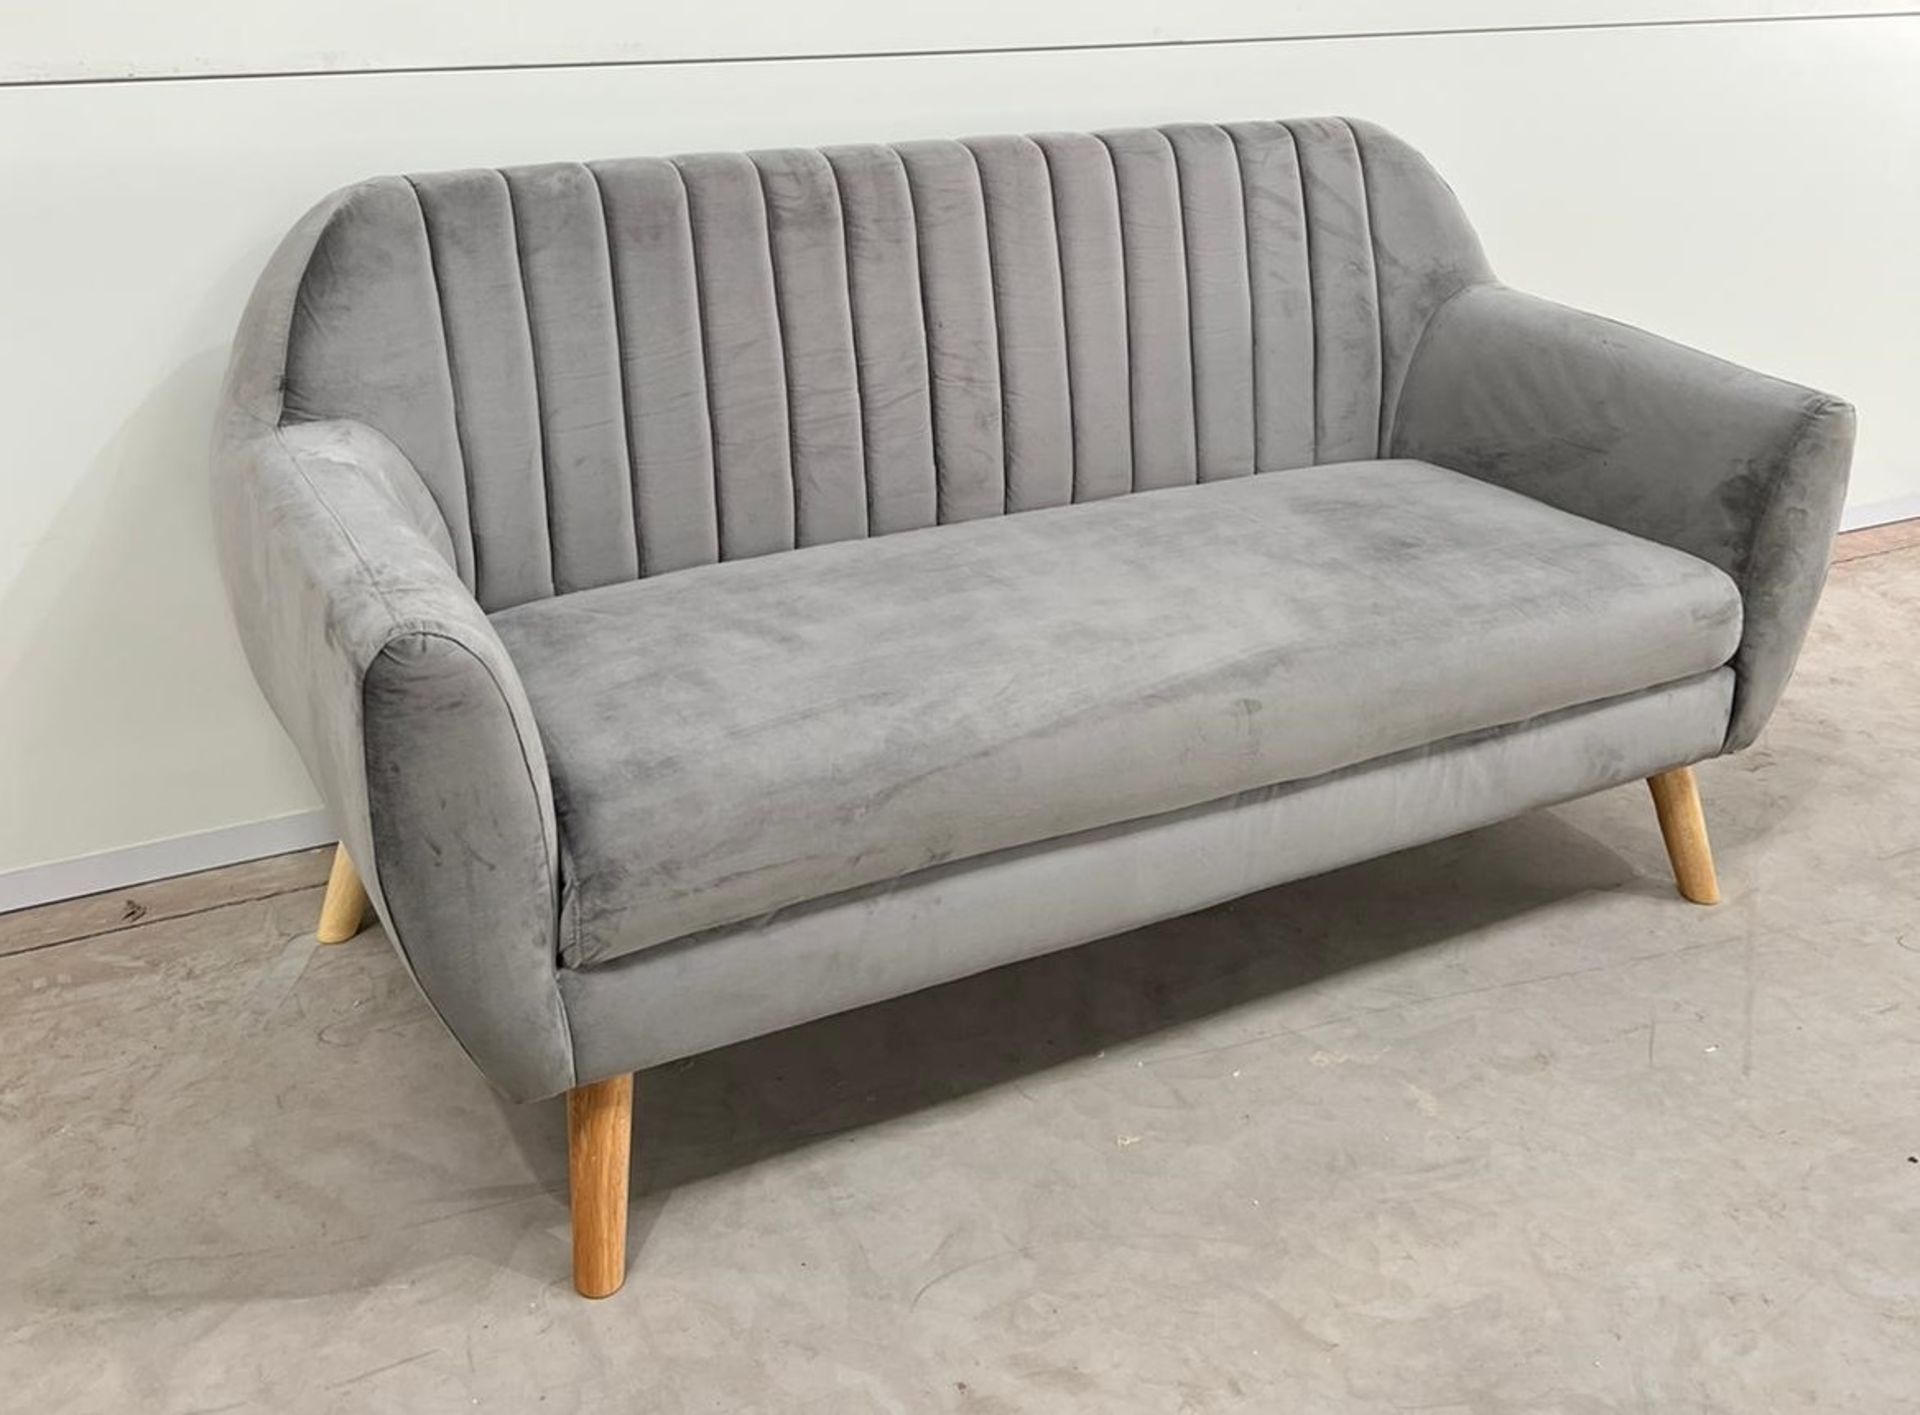 Grey Plush Sofa Make A Striking Impression In Any Home Combination Of Contemporary And Classic